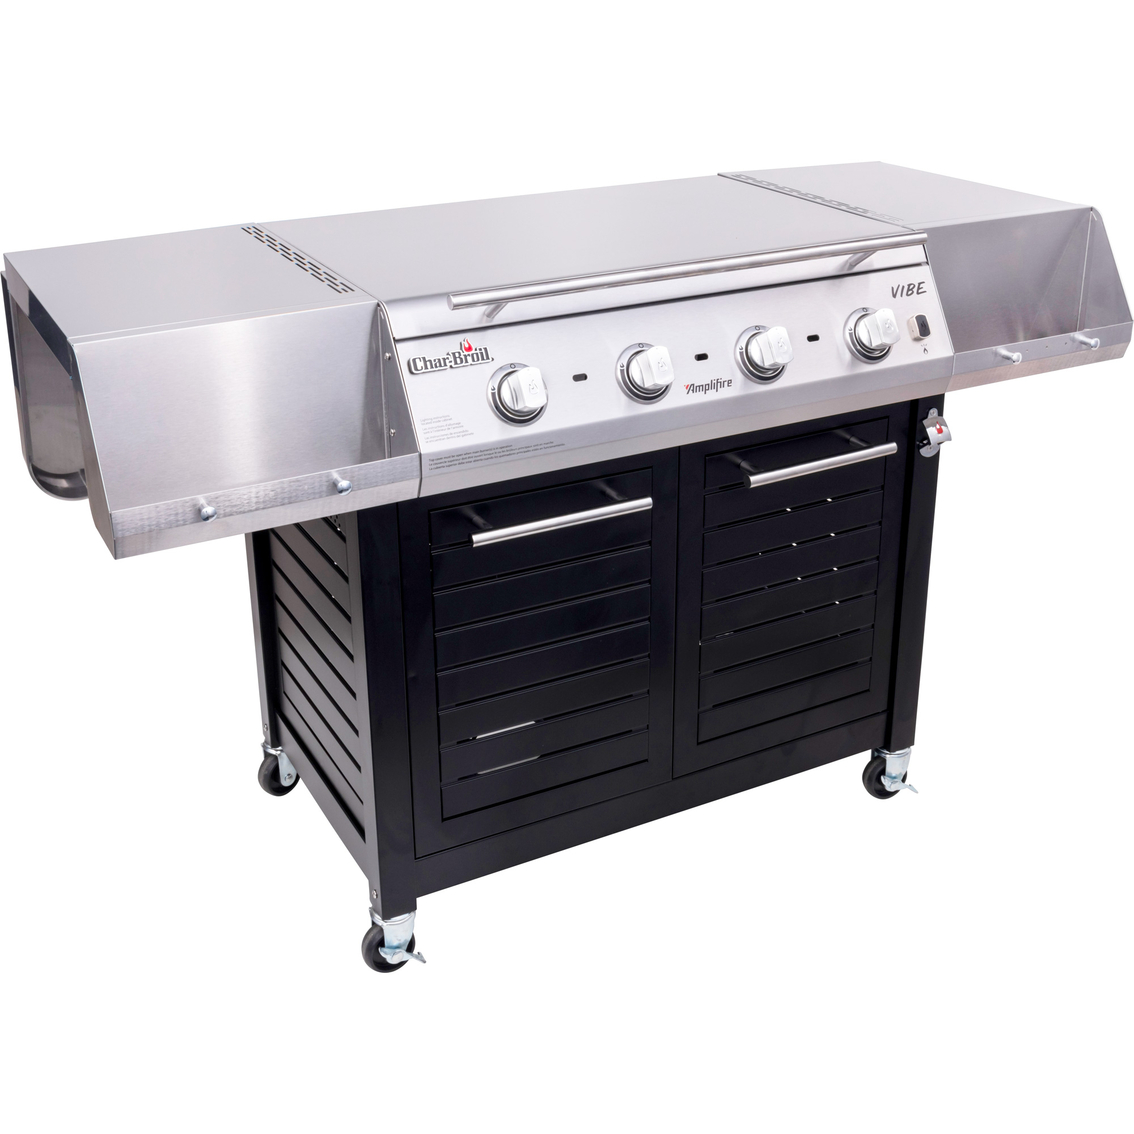 Char-Broil Vibe 535 S Amplifire Gas Grill - Image 2 of 2